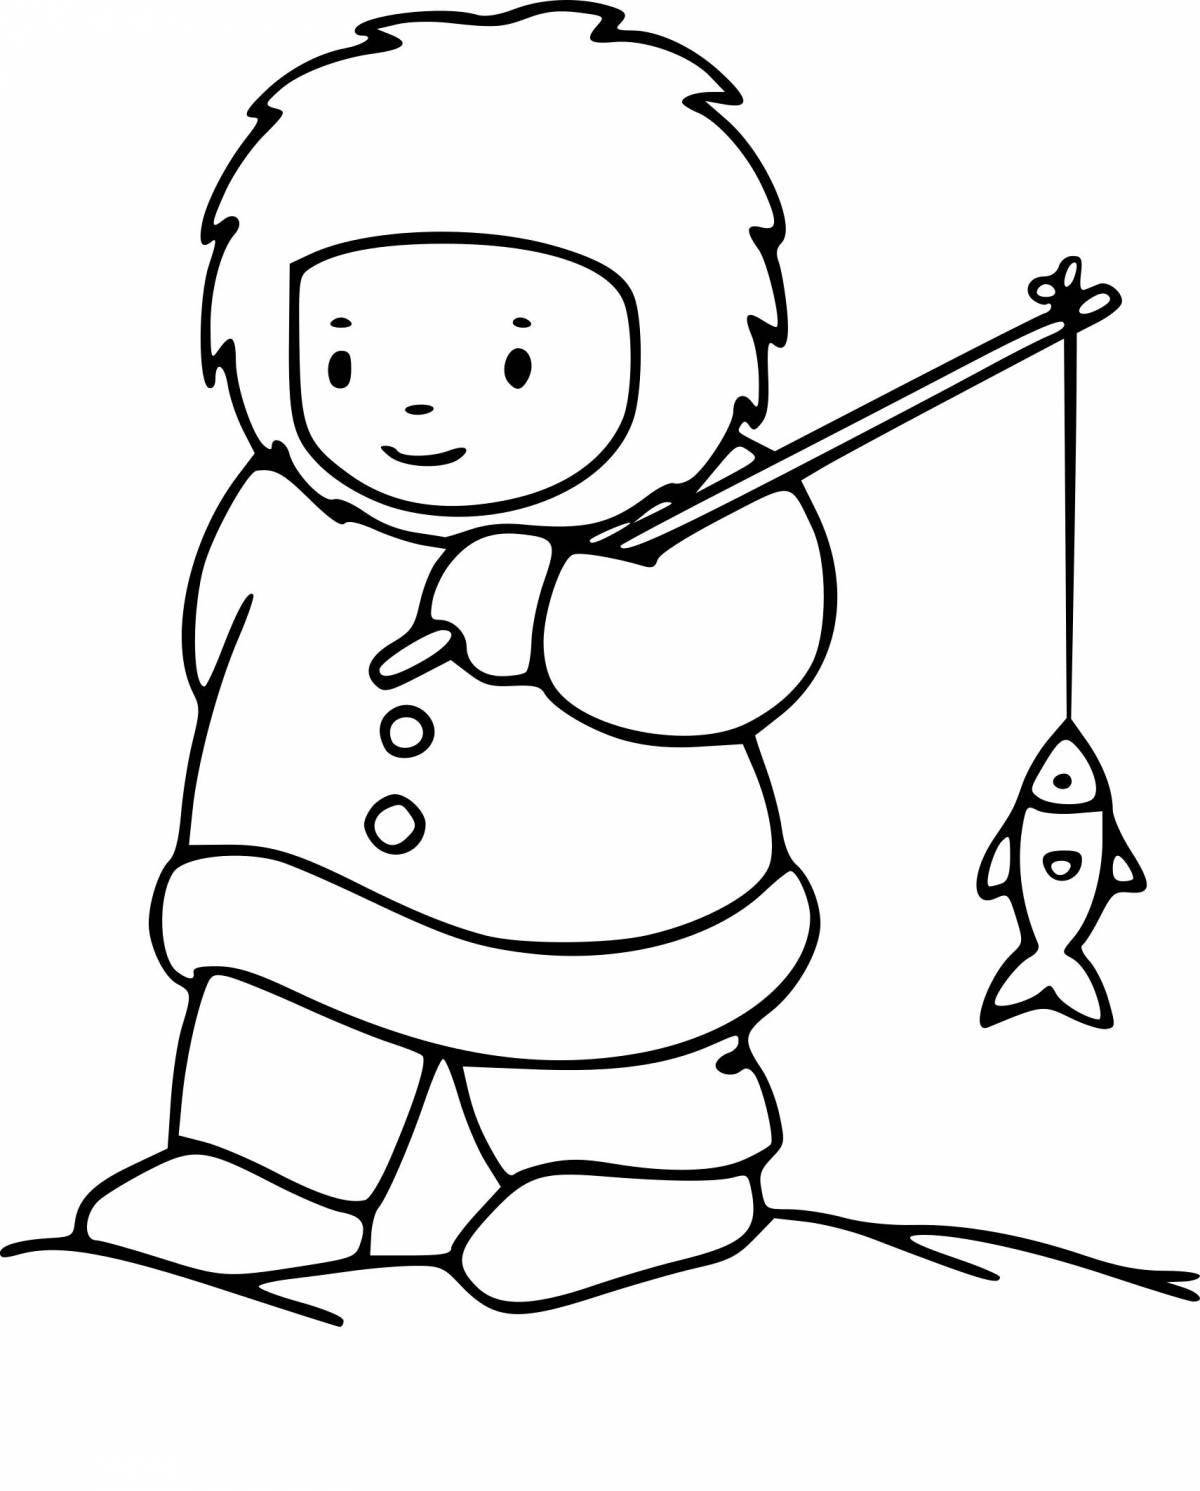 Holiday coloring book for Eskimo children